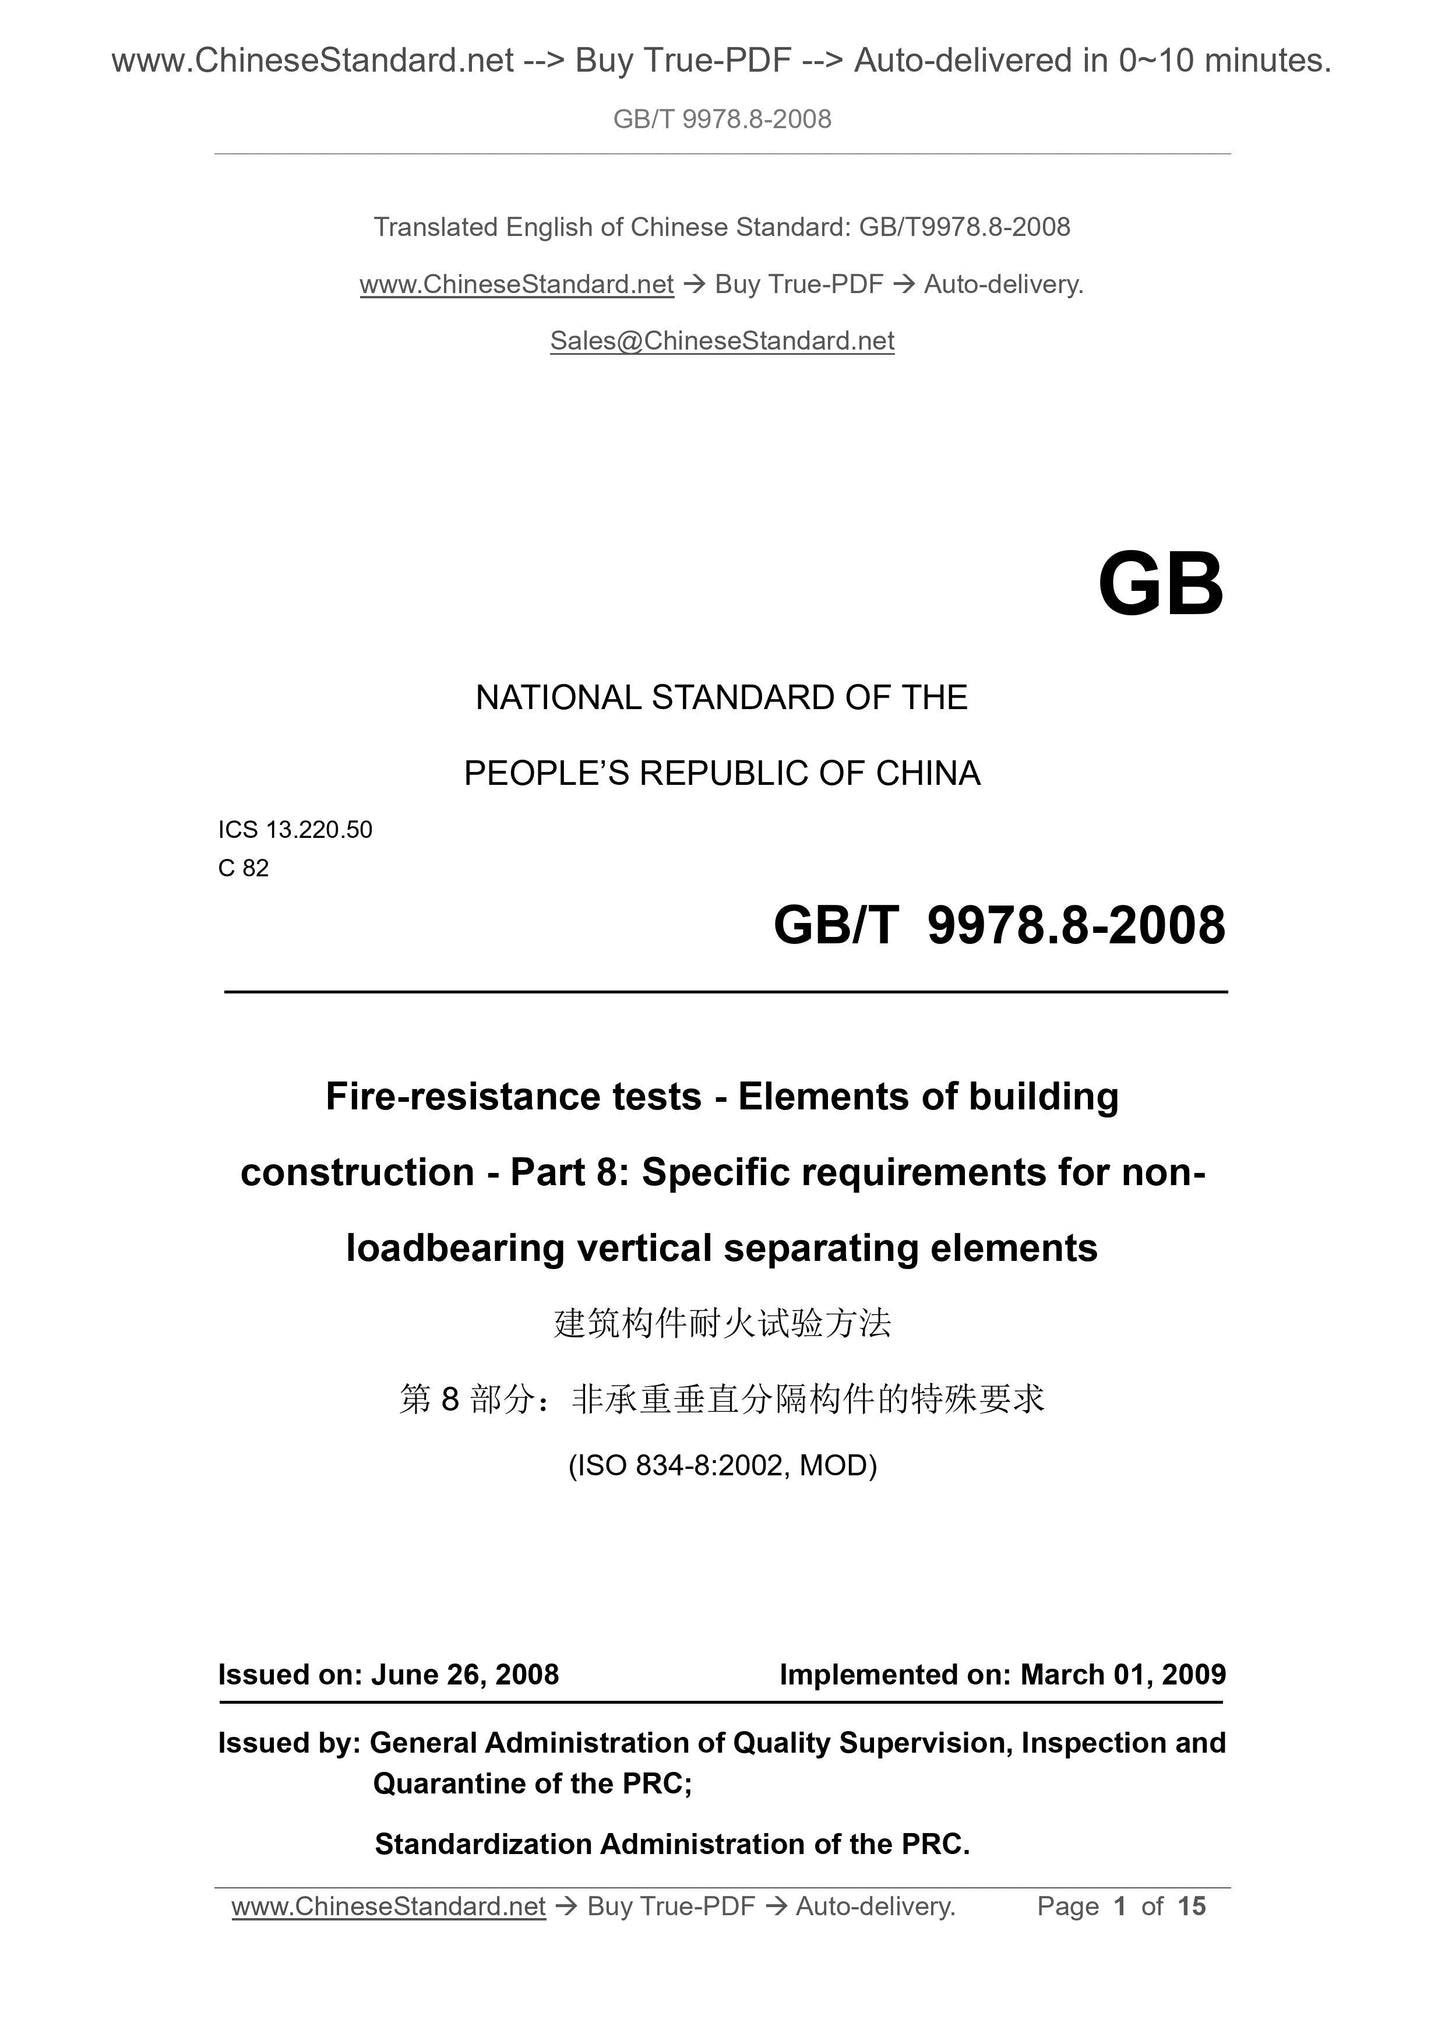 GB/T 9978.8-2008 Page 1